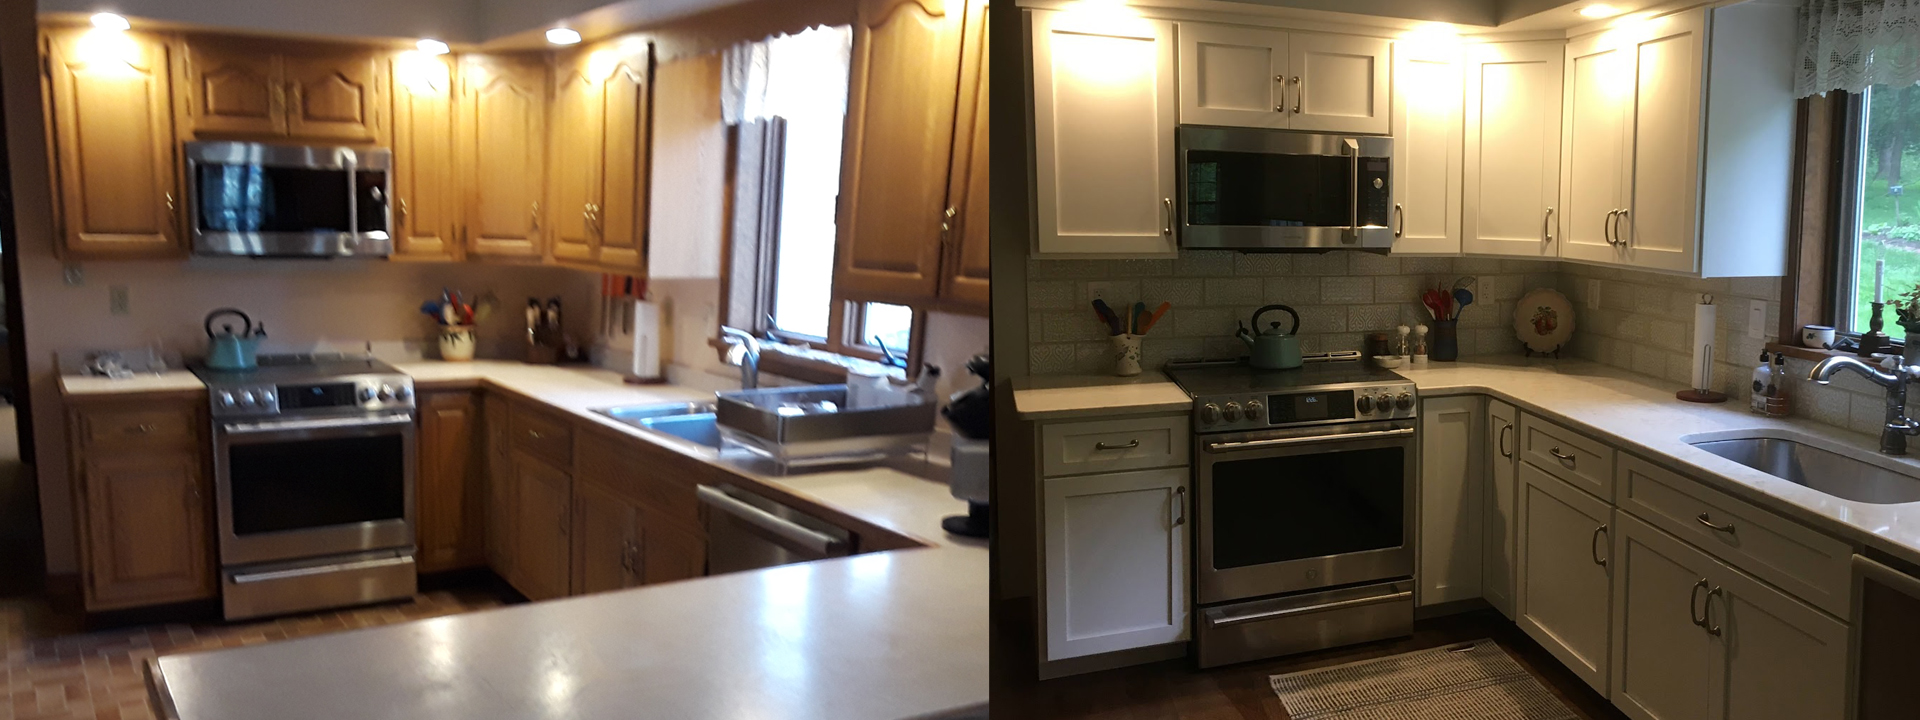 Custom Kitchen Cabinet Refacing with White Flat Panel Doors